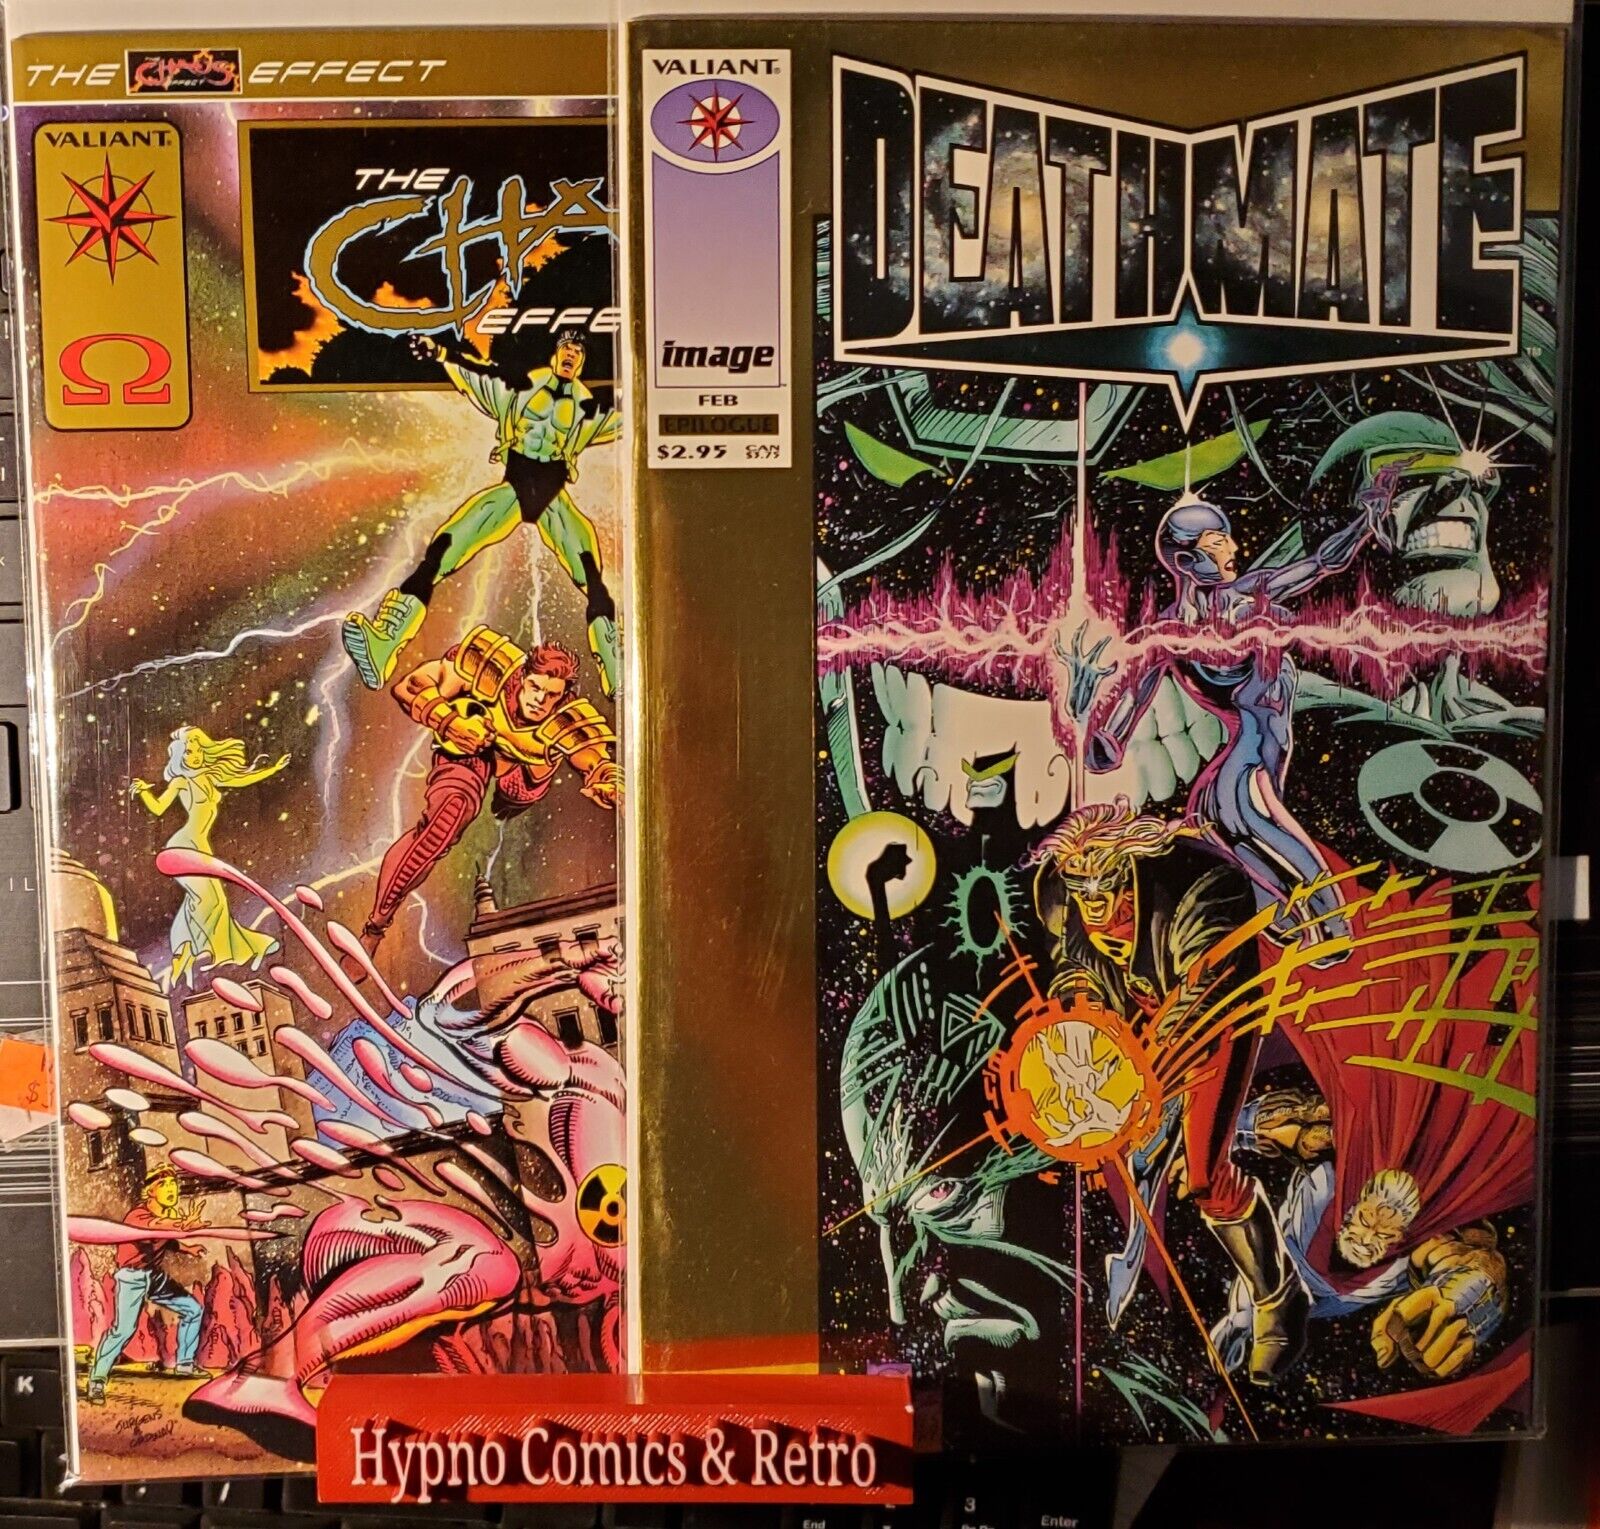 Deathmate Epilougue and The Chaos Effect Omega  Gold Variants 1994 Valiant